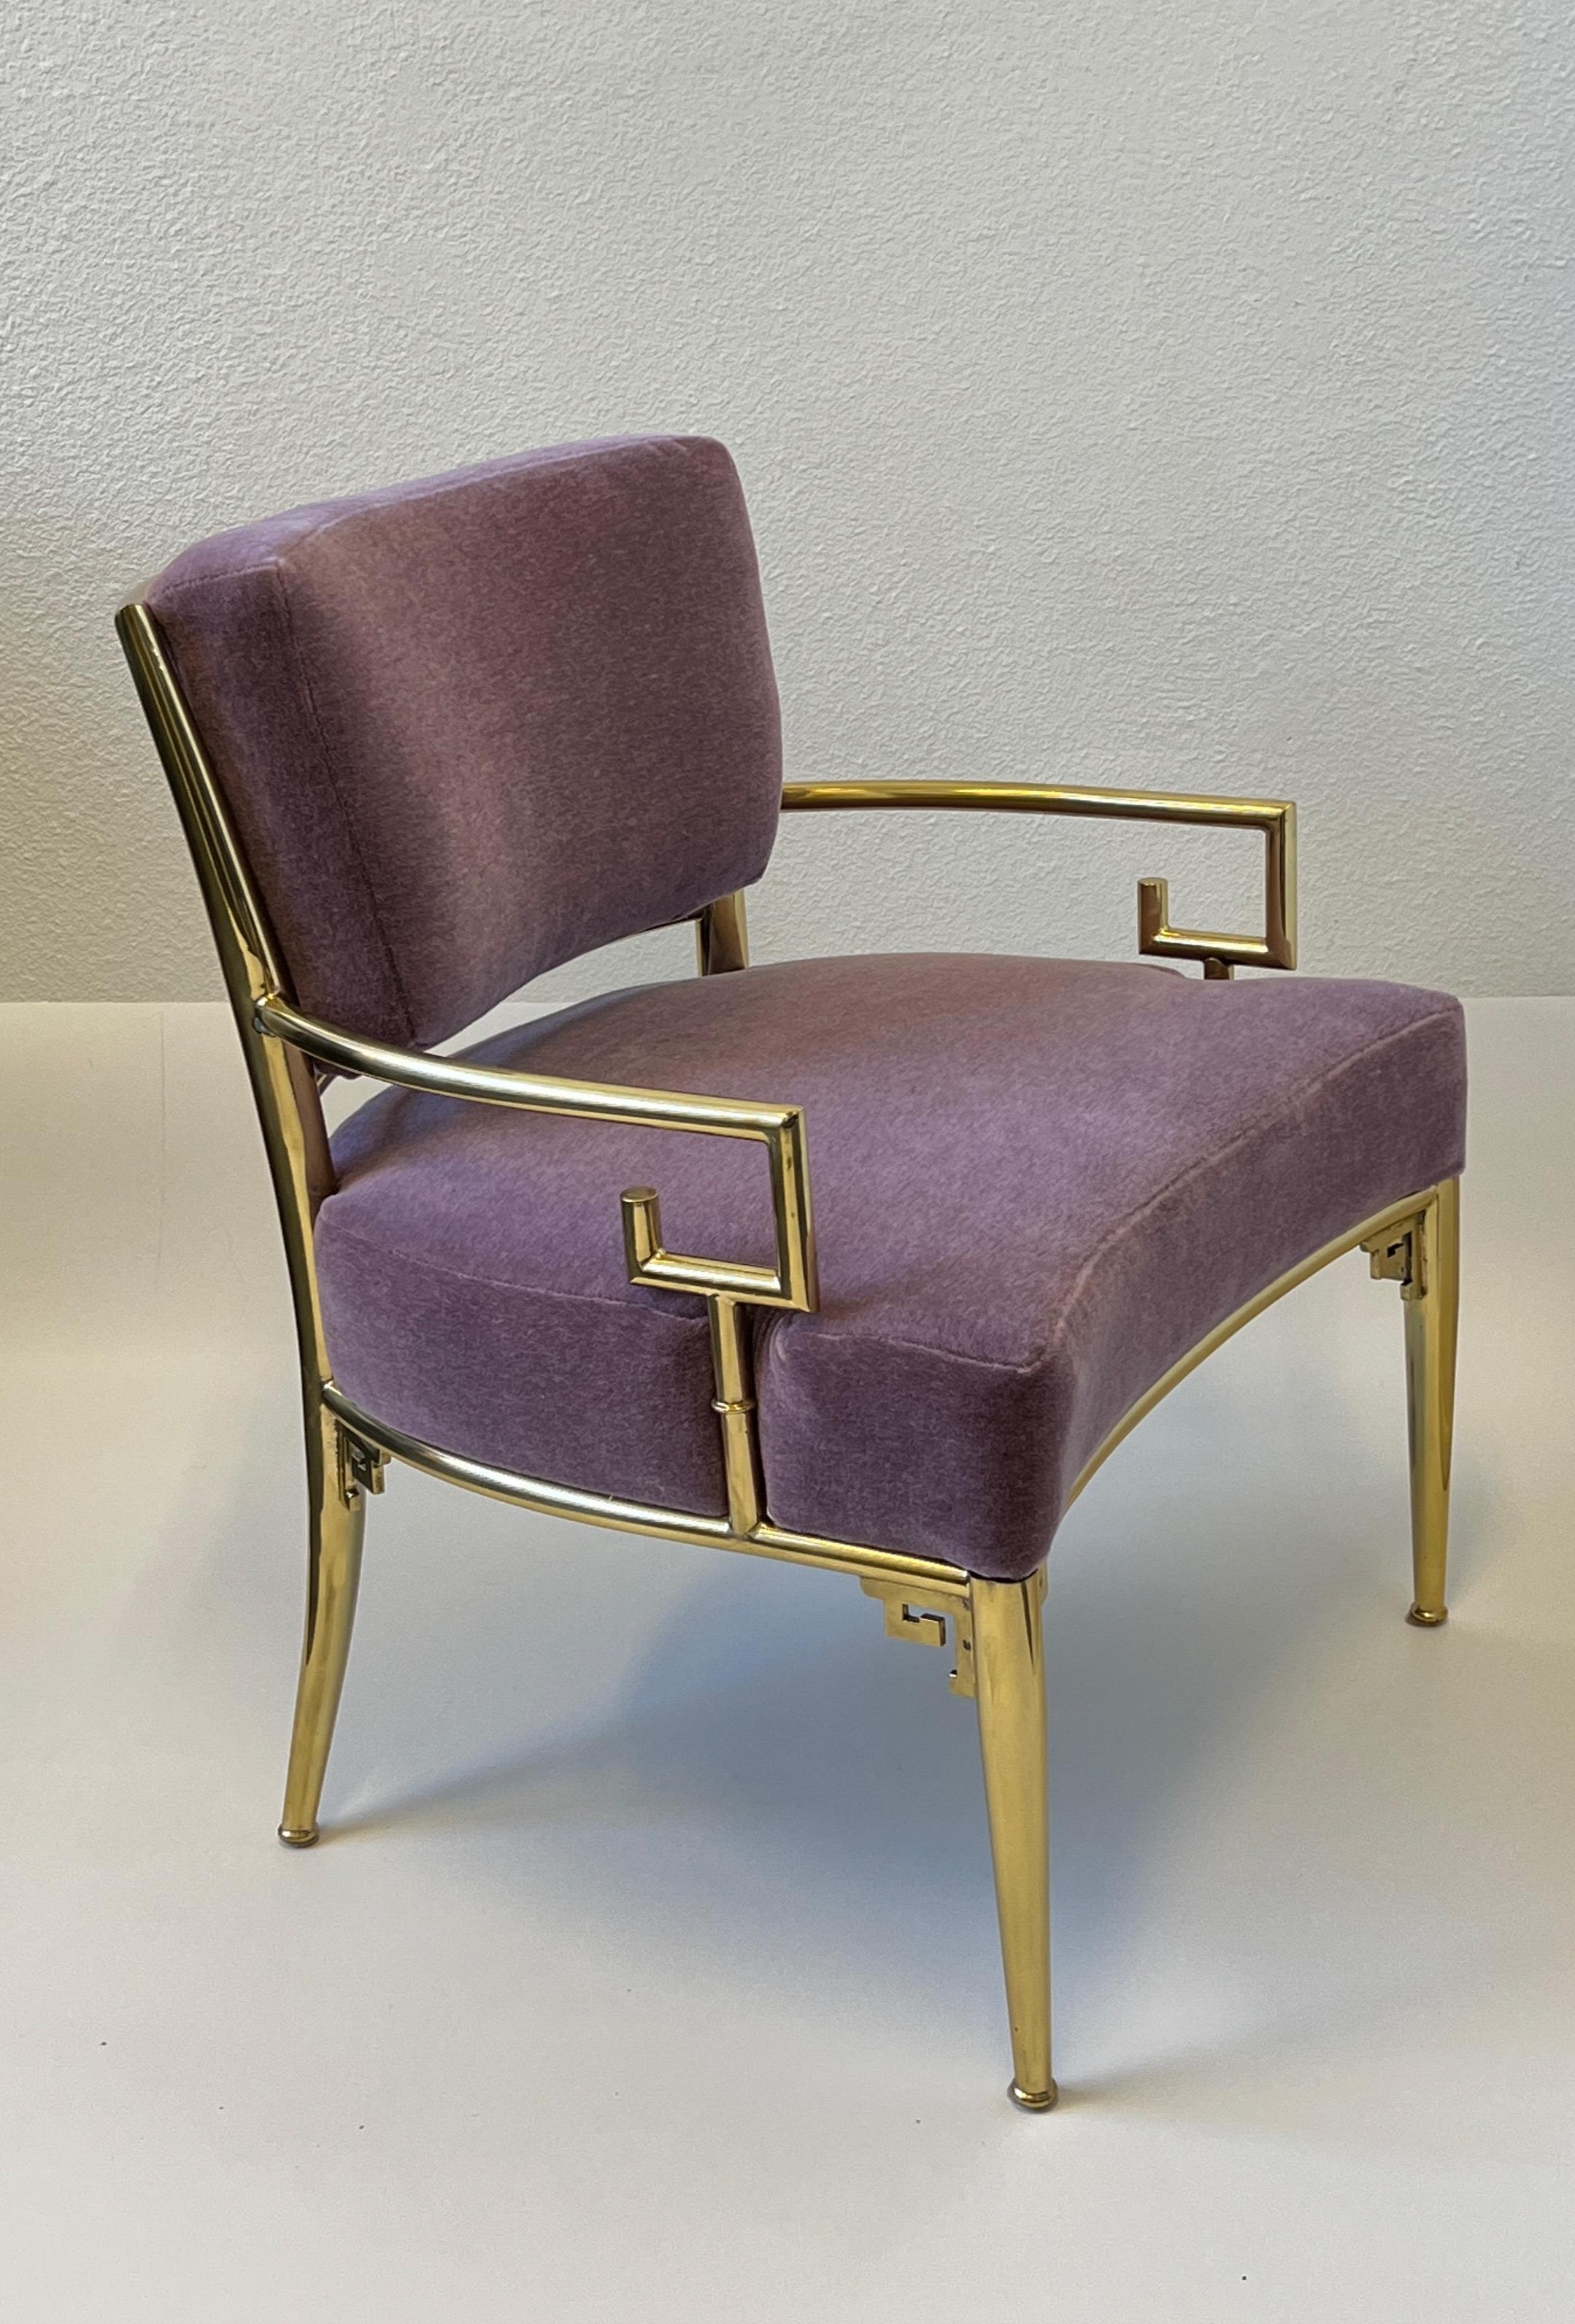 Glamorous 1970’s polish brass greek key lounge chair by Mastercraft.
Newly recovered with a soft purple mohair. 
The frame is in original condition, so it shows minor wear consistent with age. Small dent on one of the arms( see detail photos).